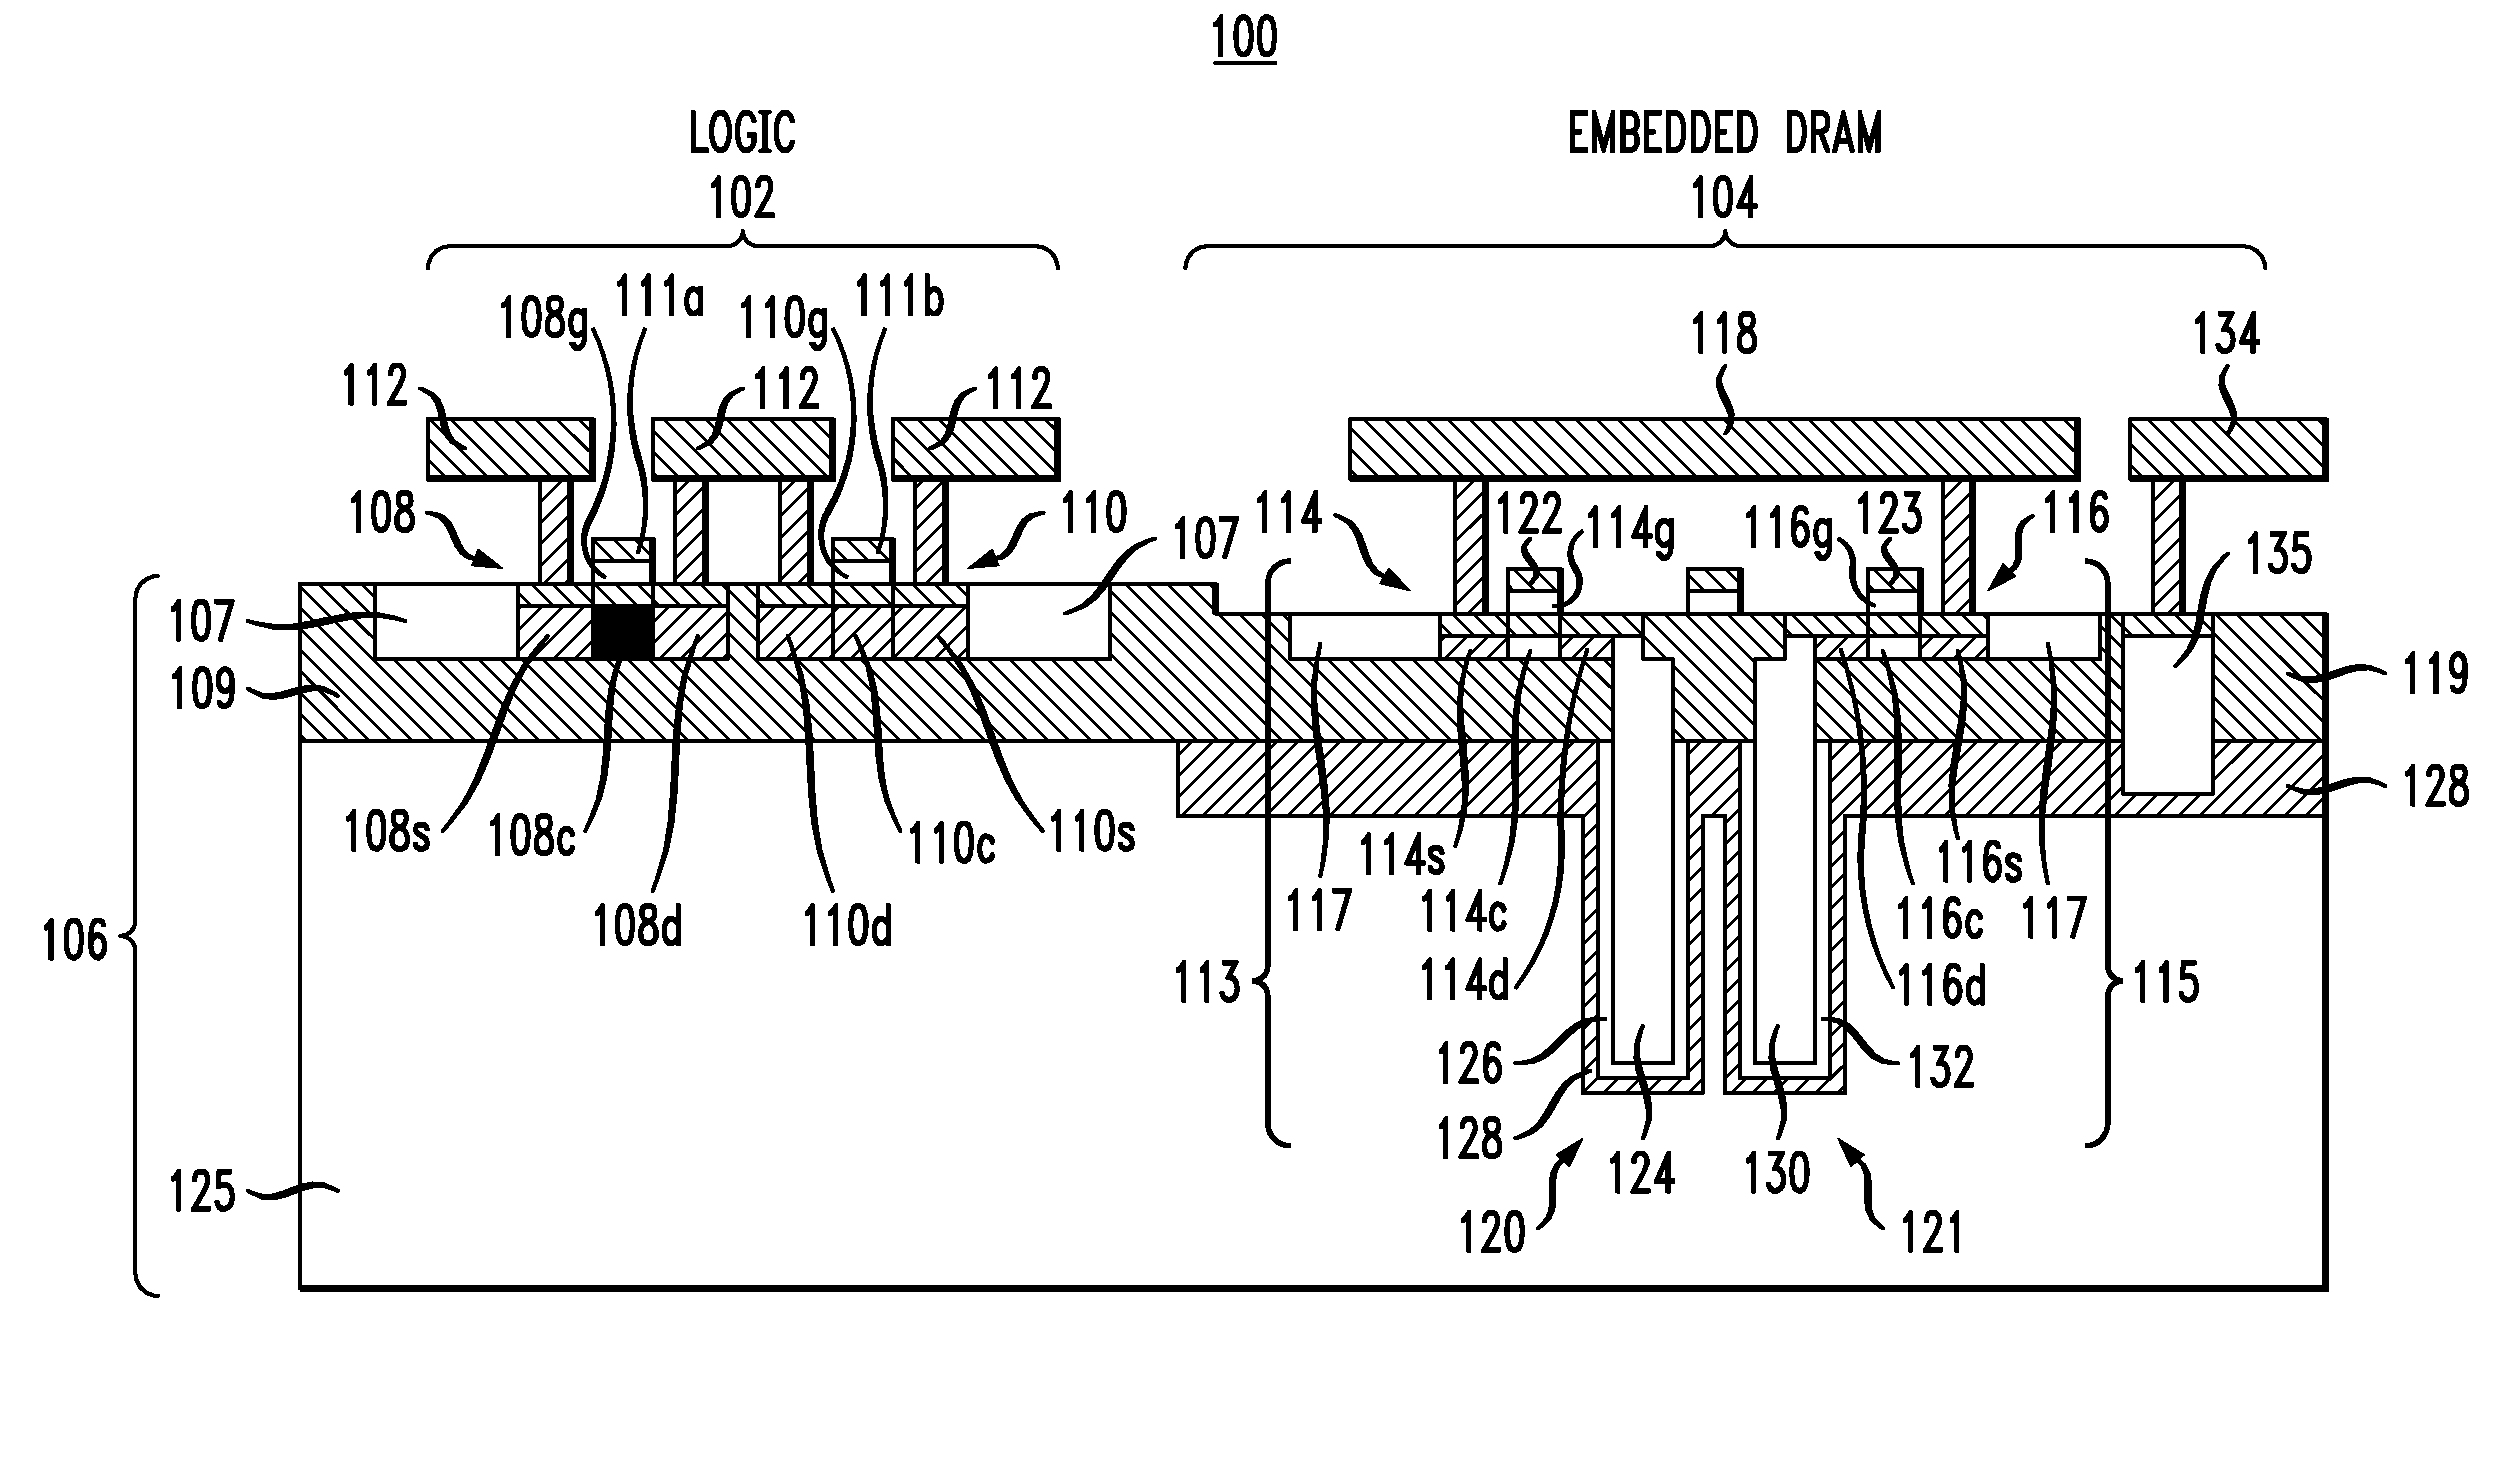 Embedded DRAM Integrated Circuits With Extremely Thin Silicon-On-Insulator Pass Transistors